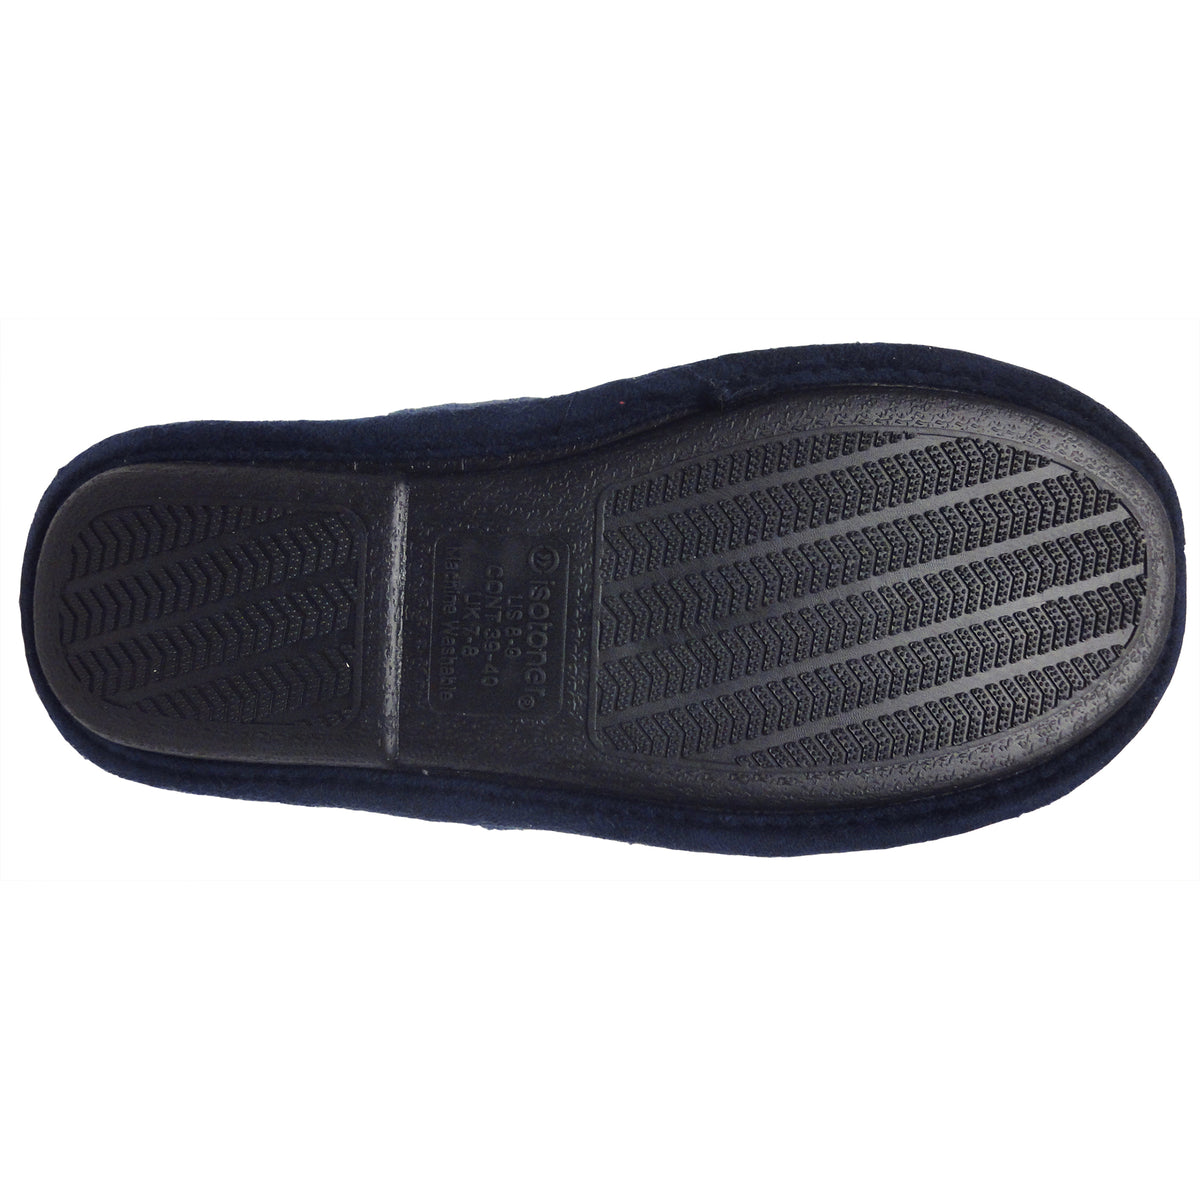 Isotoner Men’s Microterry Clog Slippers